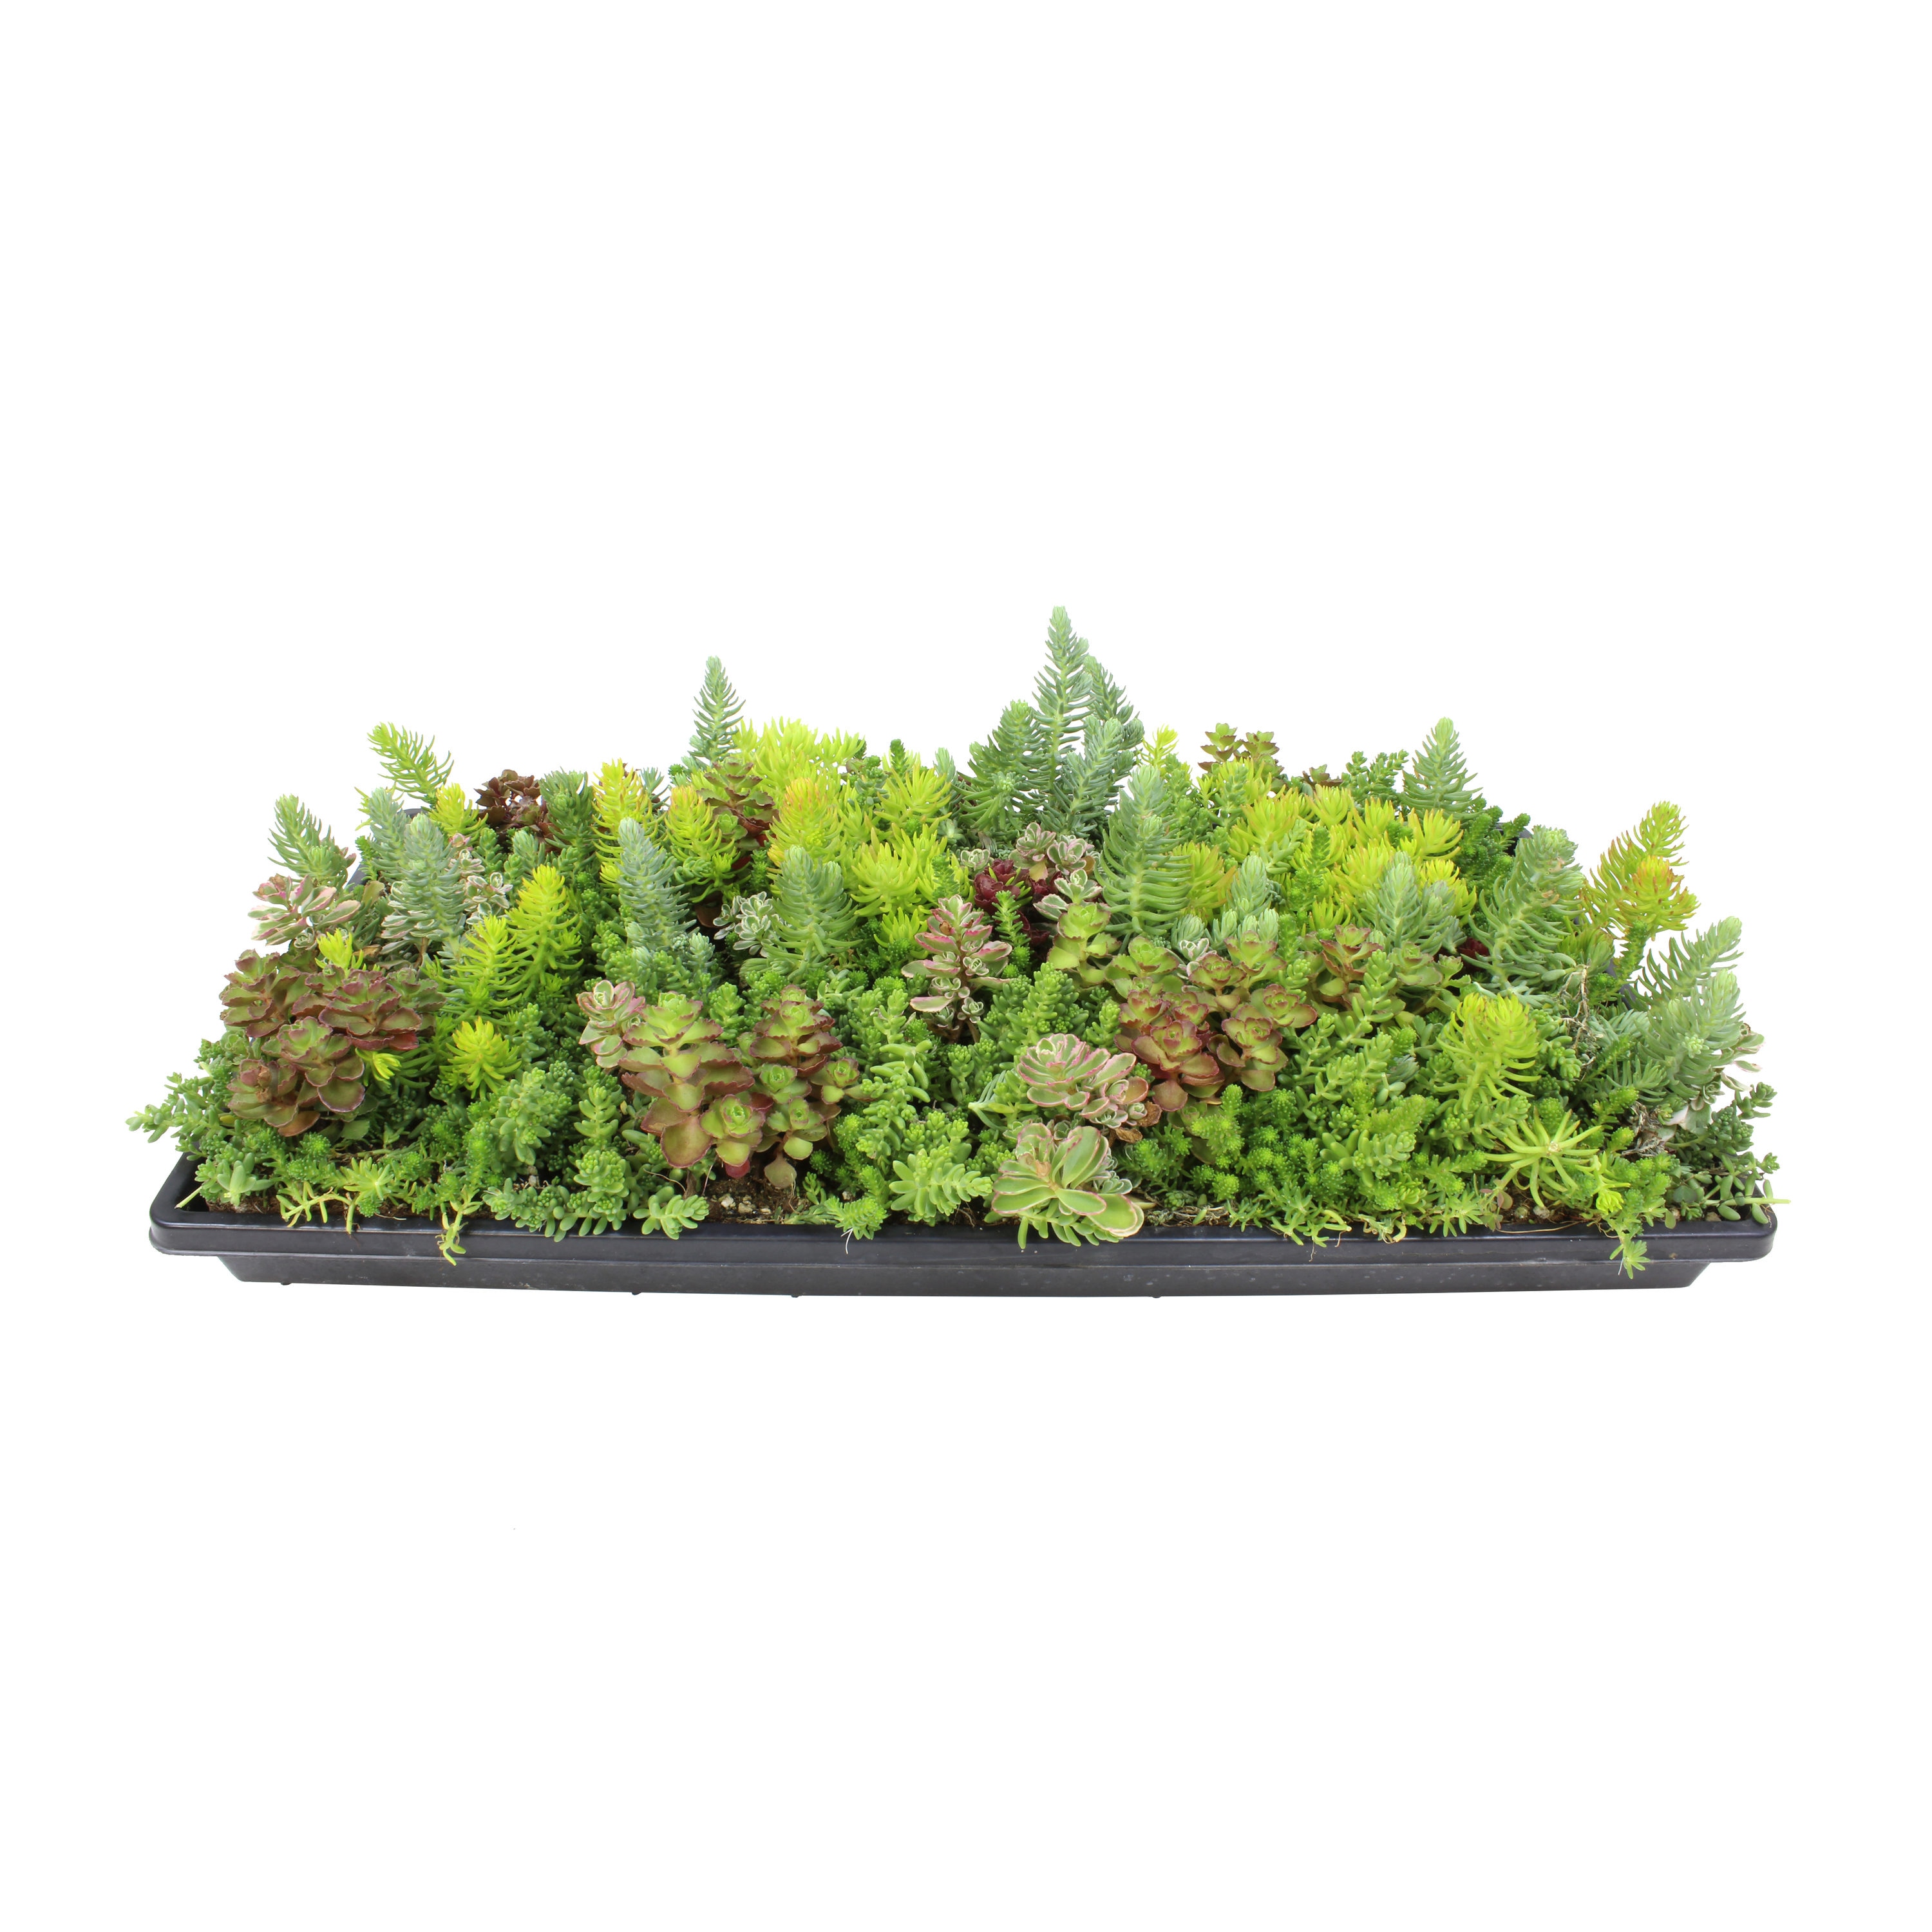 Terrarium & Fairy Garden Plants - 5 Plants in 2.5 (Is Approximately 4 to 6  Inches Height of the Plant)